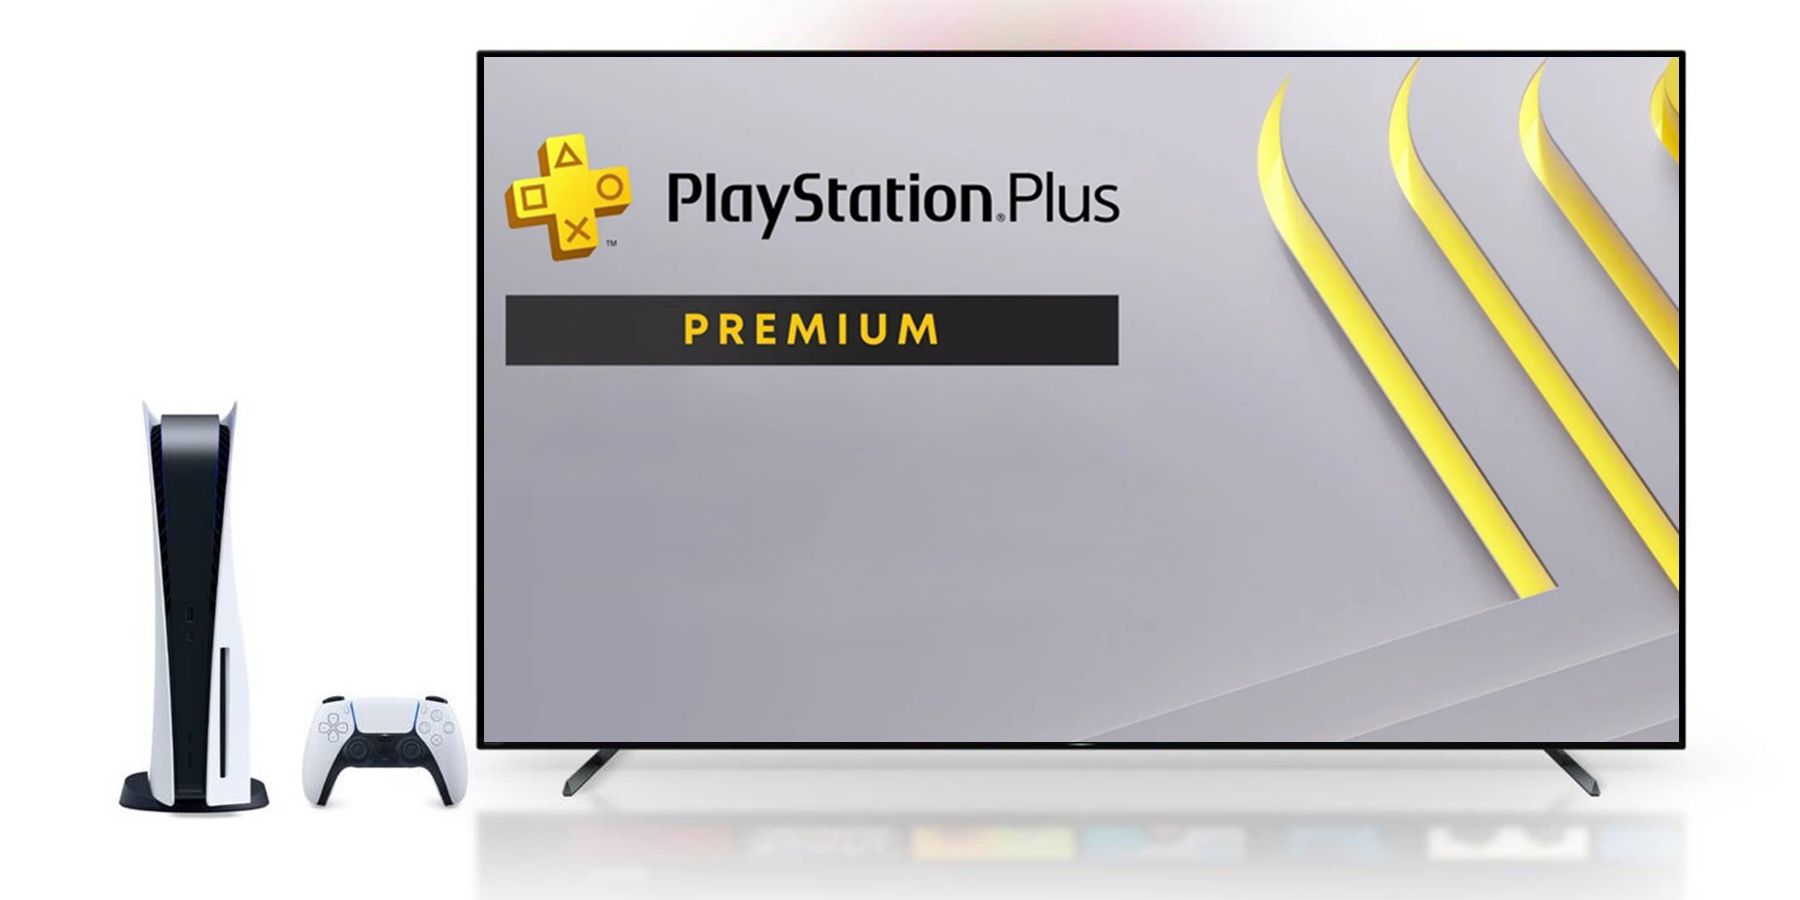 PlayStation Plus Premium/Deluxe Adds Movies Via New Sony Pictures Core App  - IGN